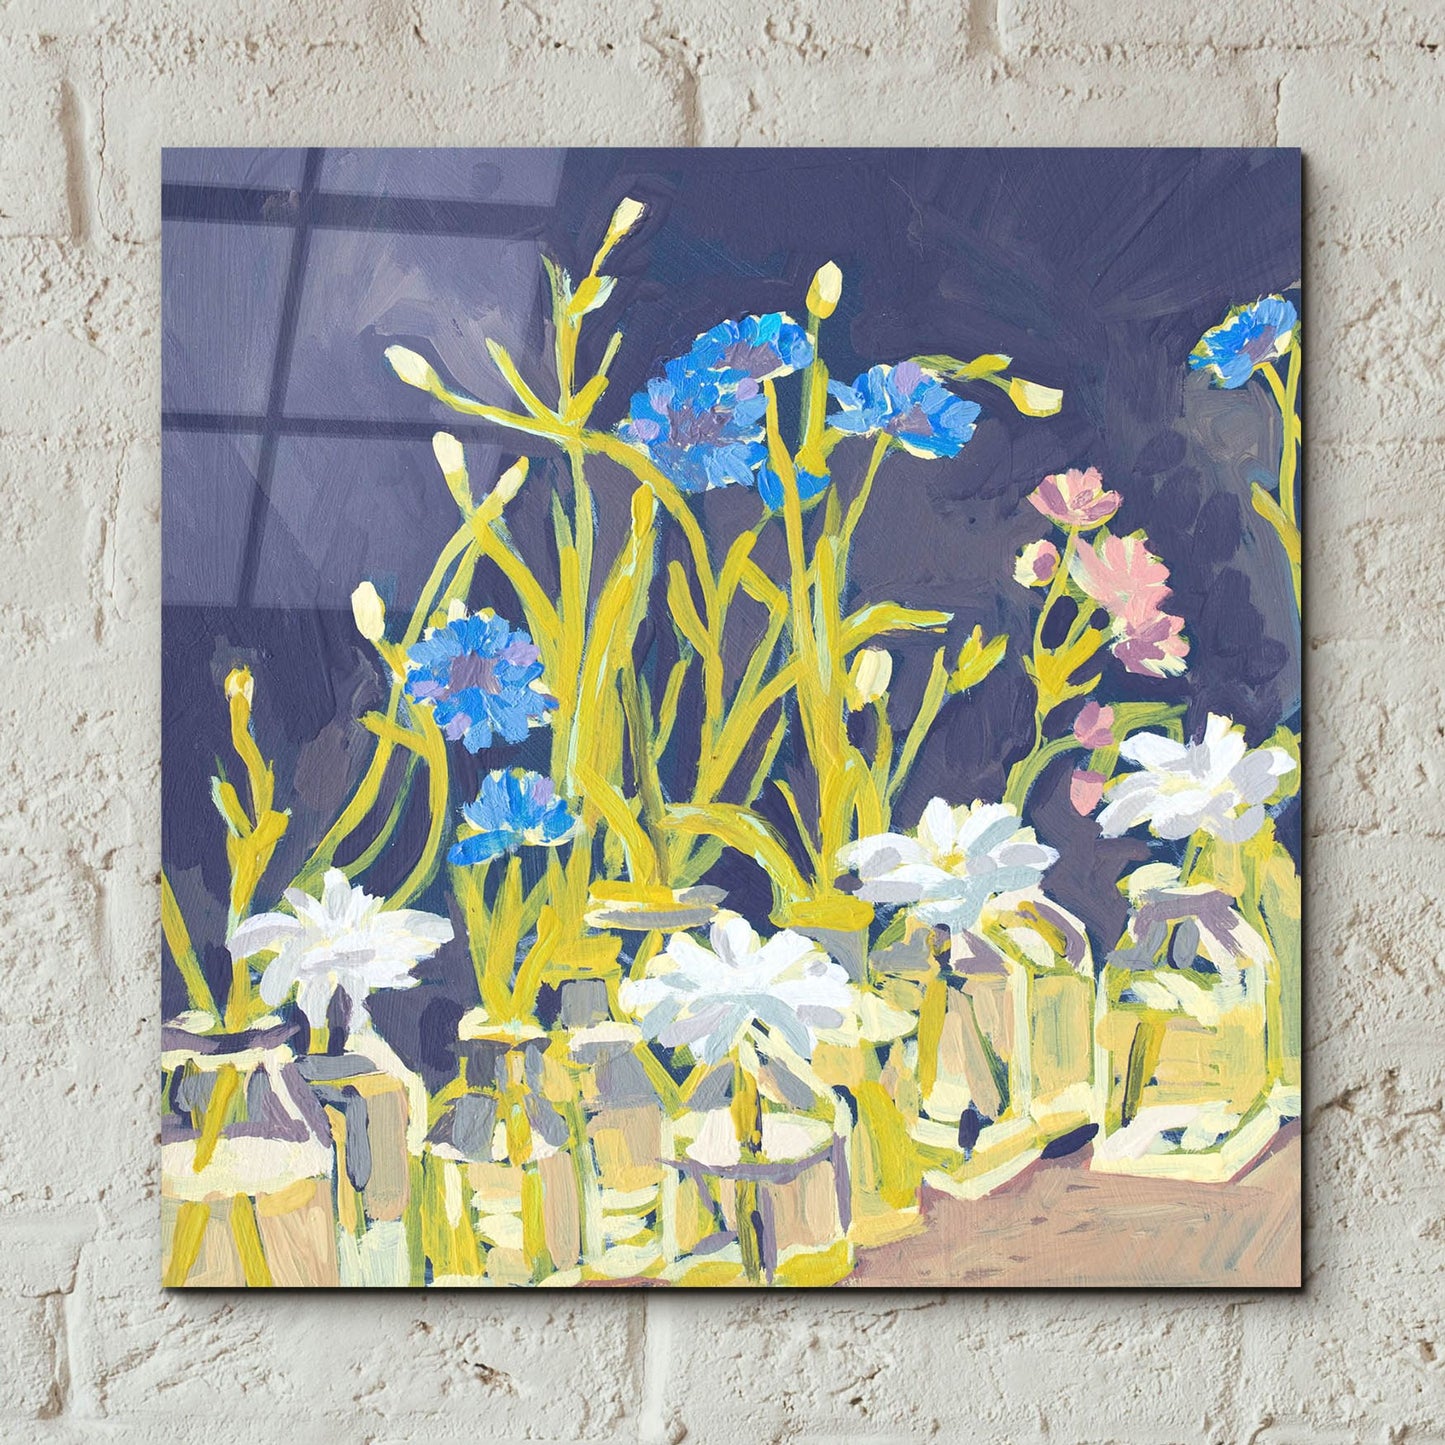 Epic Art 'Floral and Glass Menagerie' by Victoria Macmillan, Acrylic Glass Wall Art,12x12